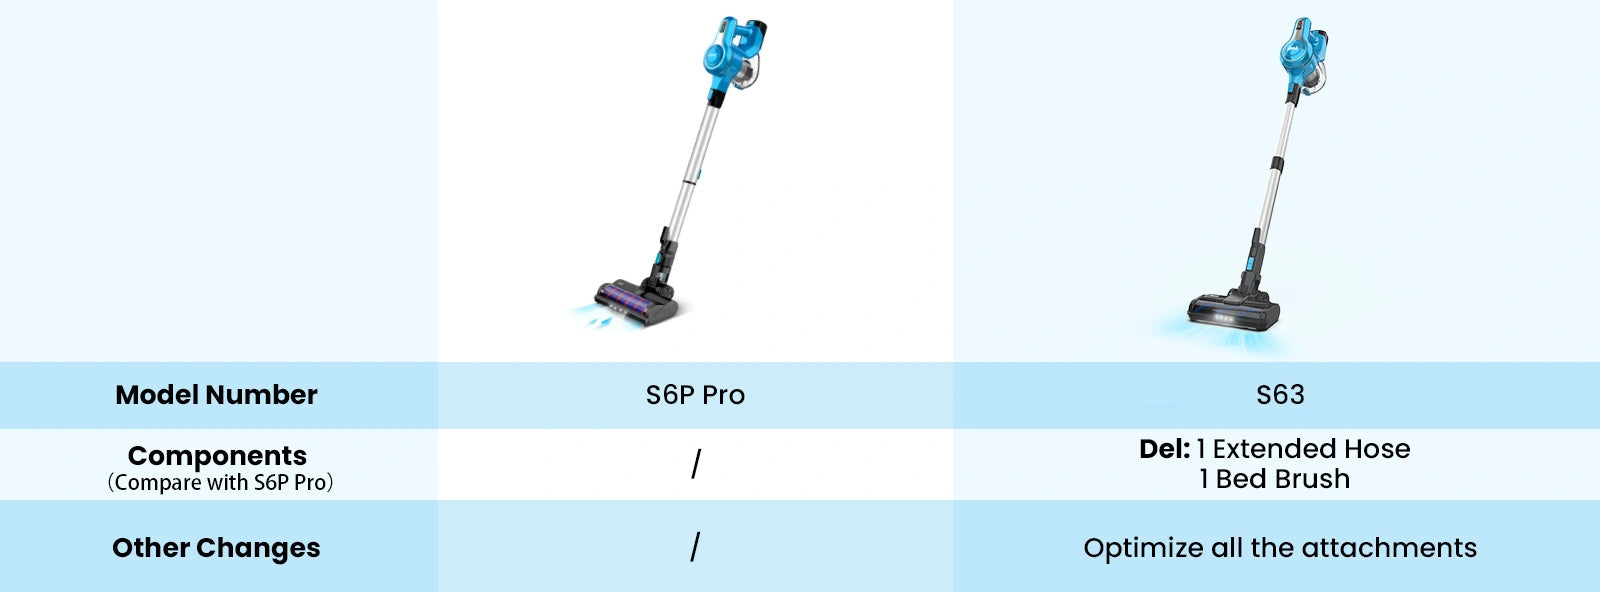 inse_s63_cordless_stick_vacuum_compare_with_inse_s6ppro_cordless_vacuum_for_desktop